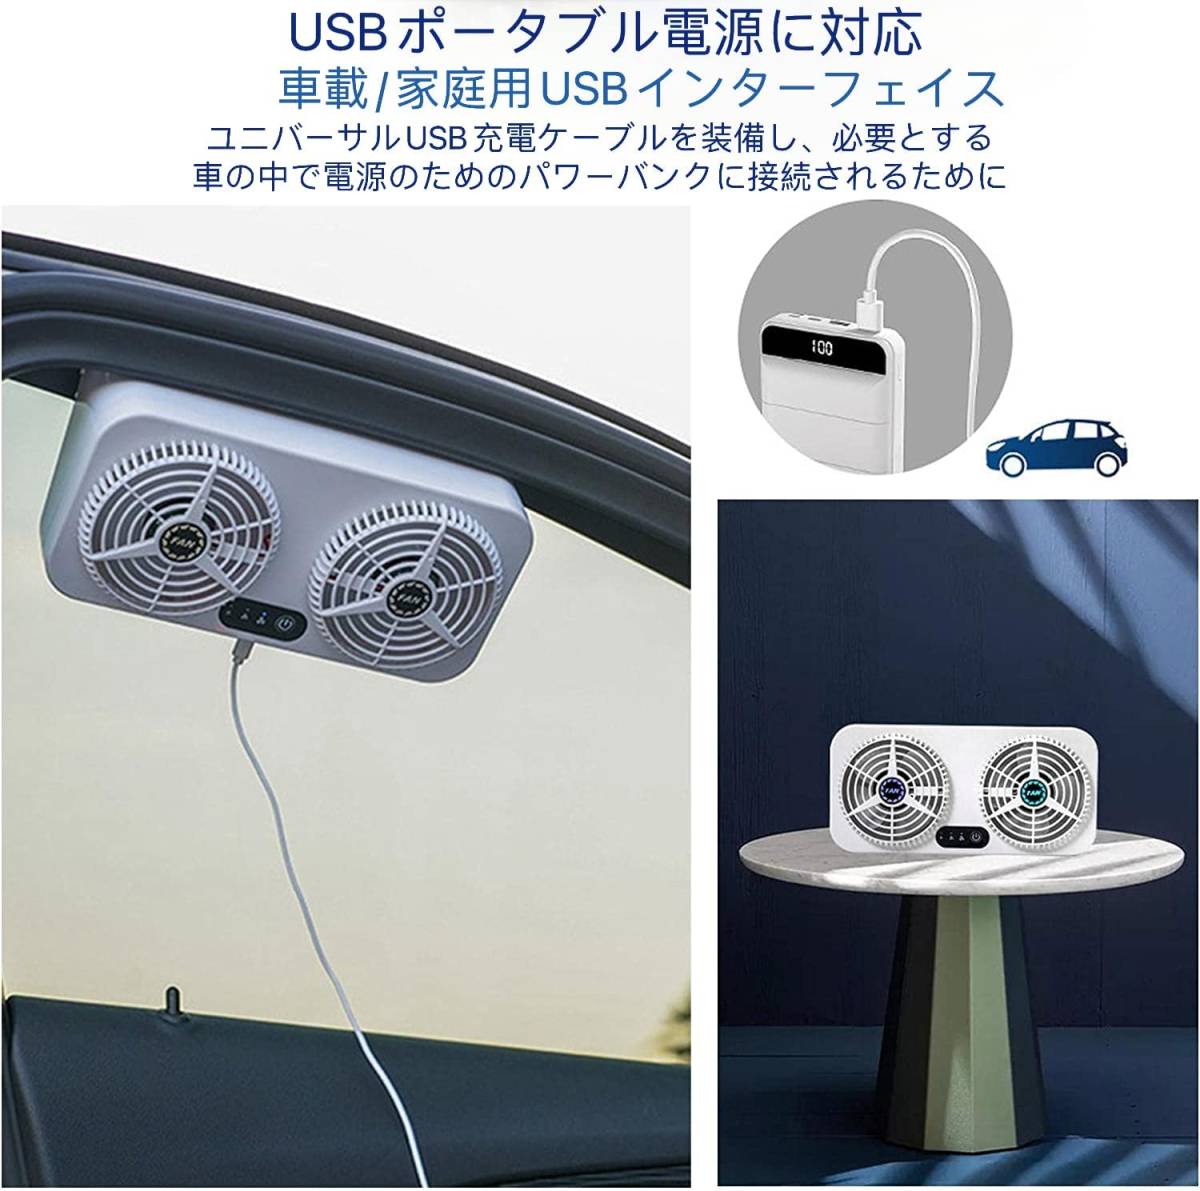  in-vehicle electric fan two fan air conditioner hot . exhaust fan air cleaning cooling smoking clean cooler,air conditioner three -step car summer place ... through manner Drive white sleeping area in the vehicle 